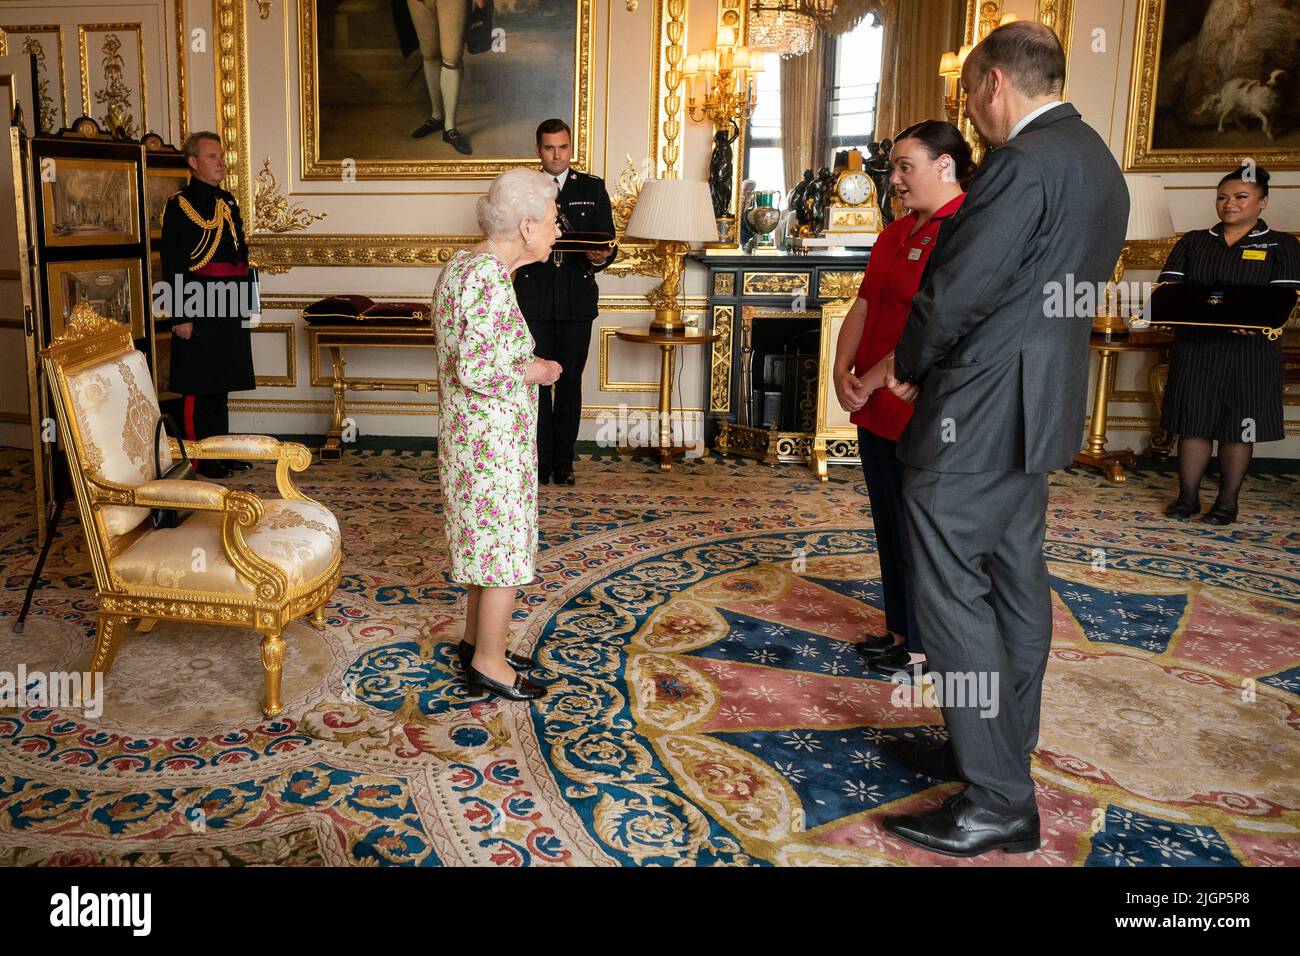 Queen Elizabeth II presenting the George Cross to representatives of the National Health Service Mr Peter May, Permanent Secretary at the Department of Health and Chief Executive of Health and Social care, and Sister Joanna Hogg, Royal Victoria Hospital Emergency Department, during an Audience at Windsor Castle, Berkshire. Picture date: Tuesday July 12, 2022. Stock Photo